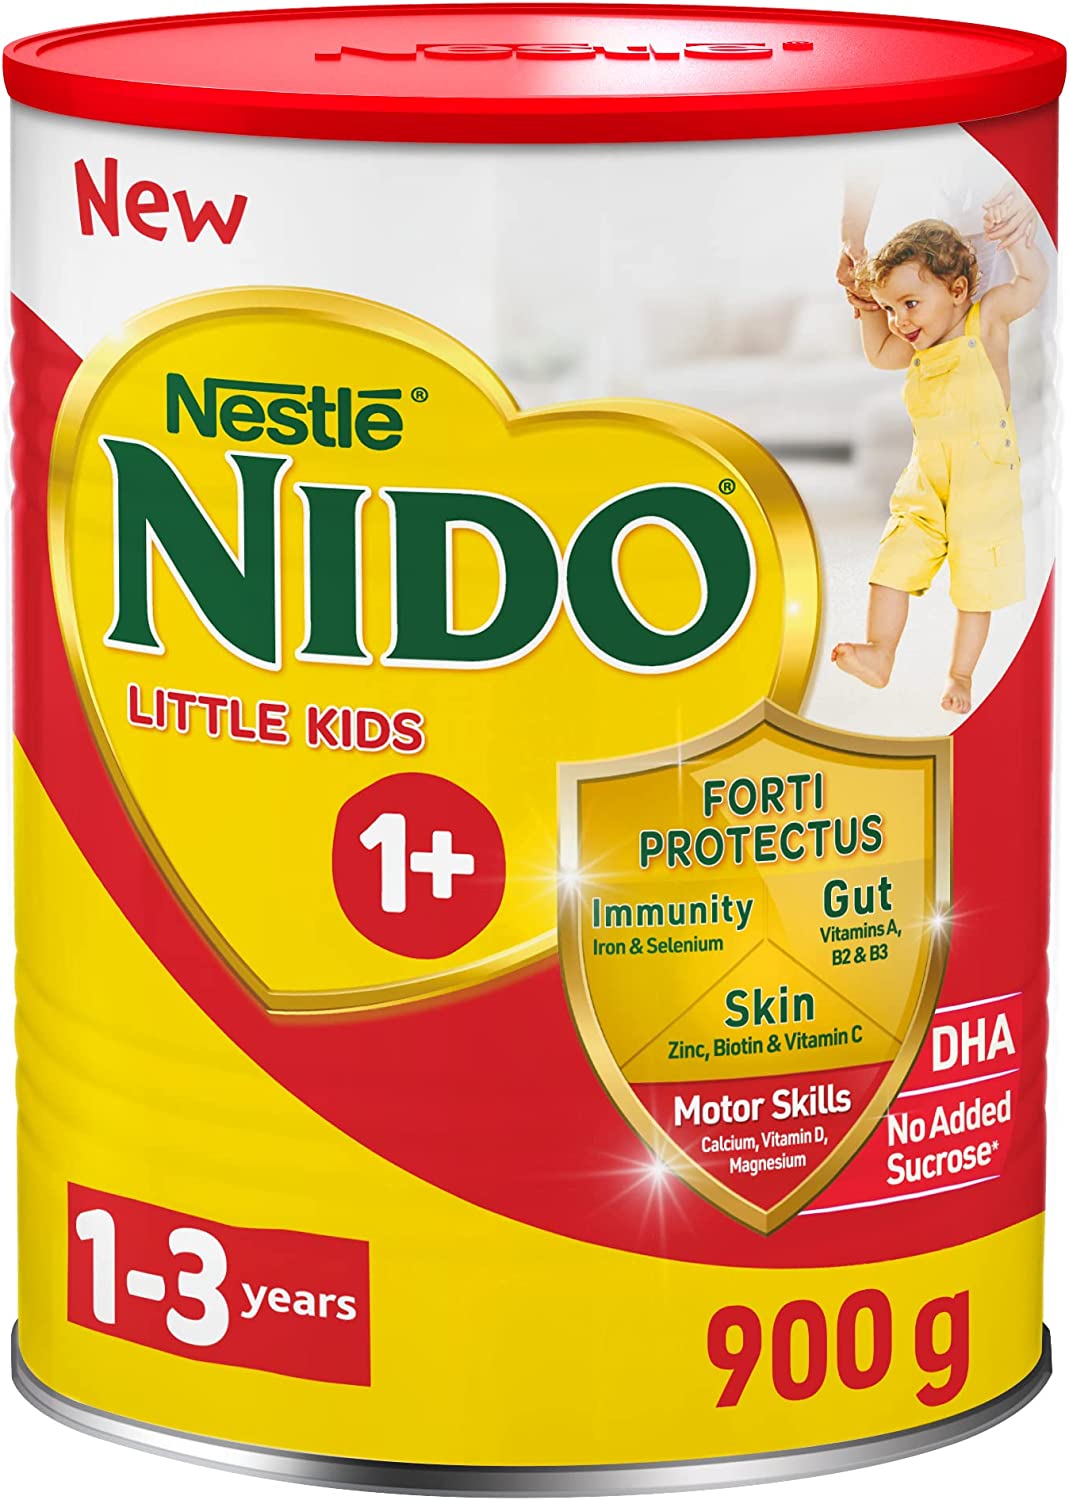 Nido NESTLE One Plus growing up formula for toddlers 1 3 years 900g tin, Red